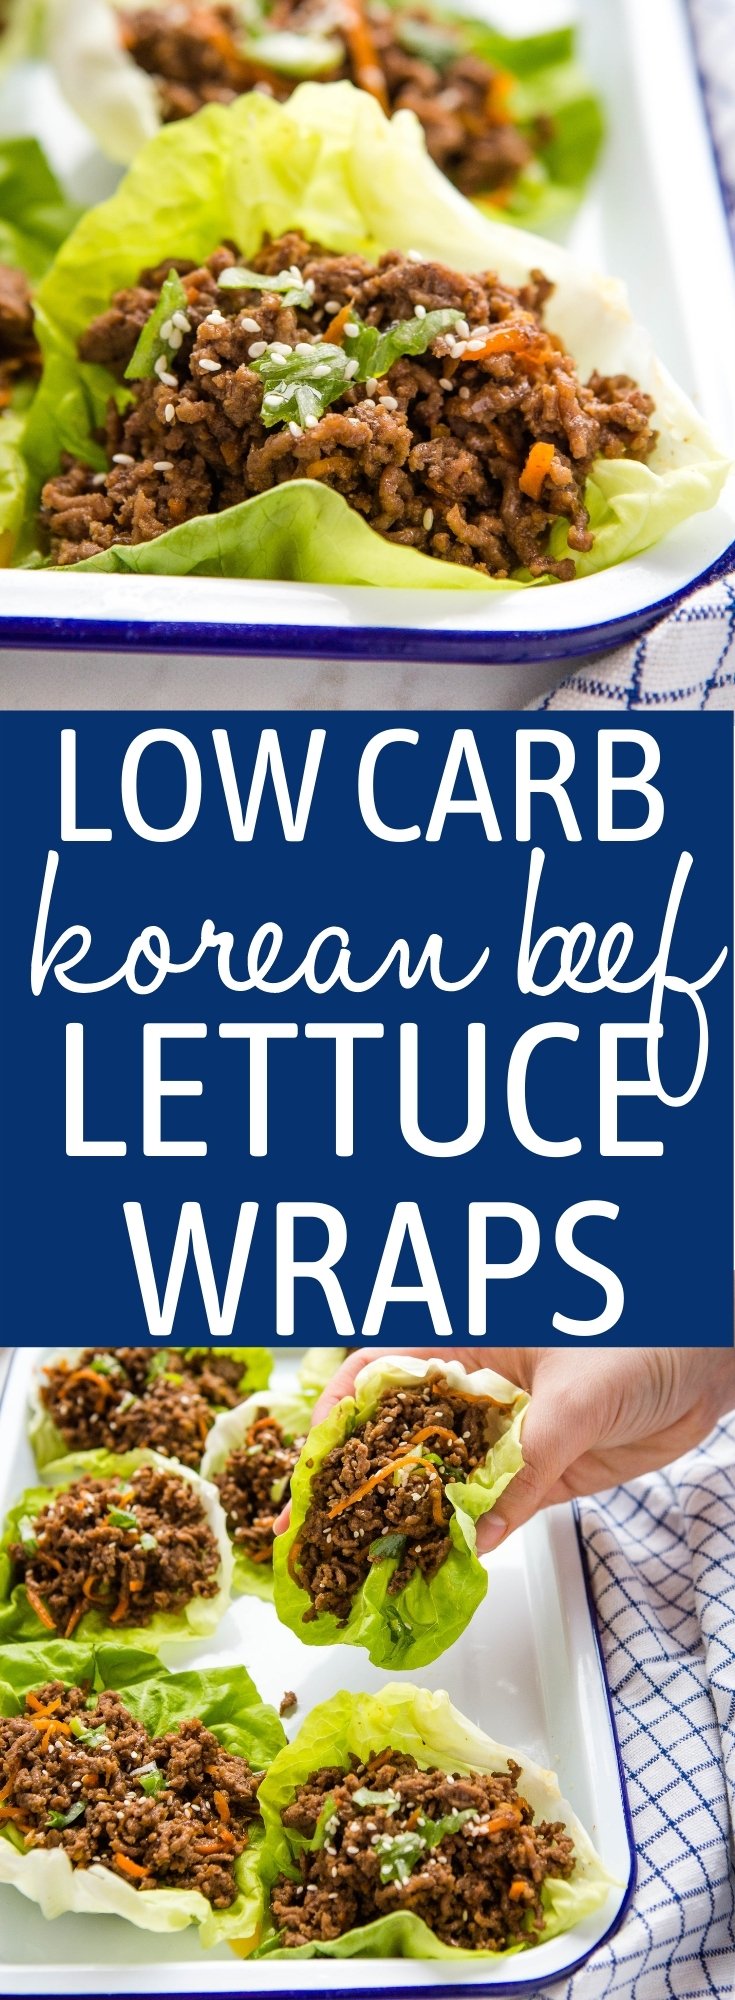 These Low Carb Korean Beef Lettuce Wraps are the perfect healthy Keto or Low Carb meal idea! Packed with juicy beef, sweet and savoury flavours and veggies! Only 1 gram of net carbs each! Recipe from thebusybaker.ca! #koreanbeeflettucewraps #koreanbeefwraps #ketolettucewraps #keto #lowcarb via @busybakerblog